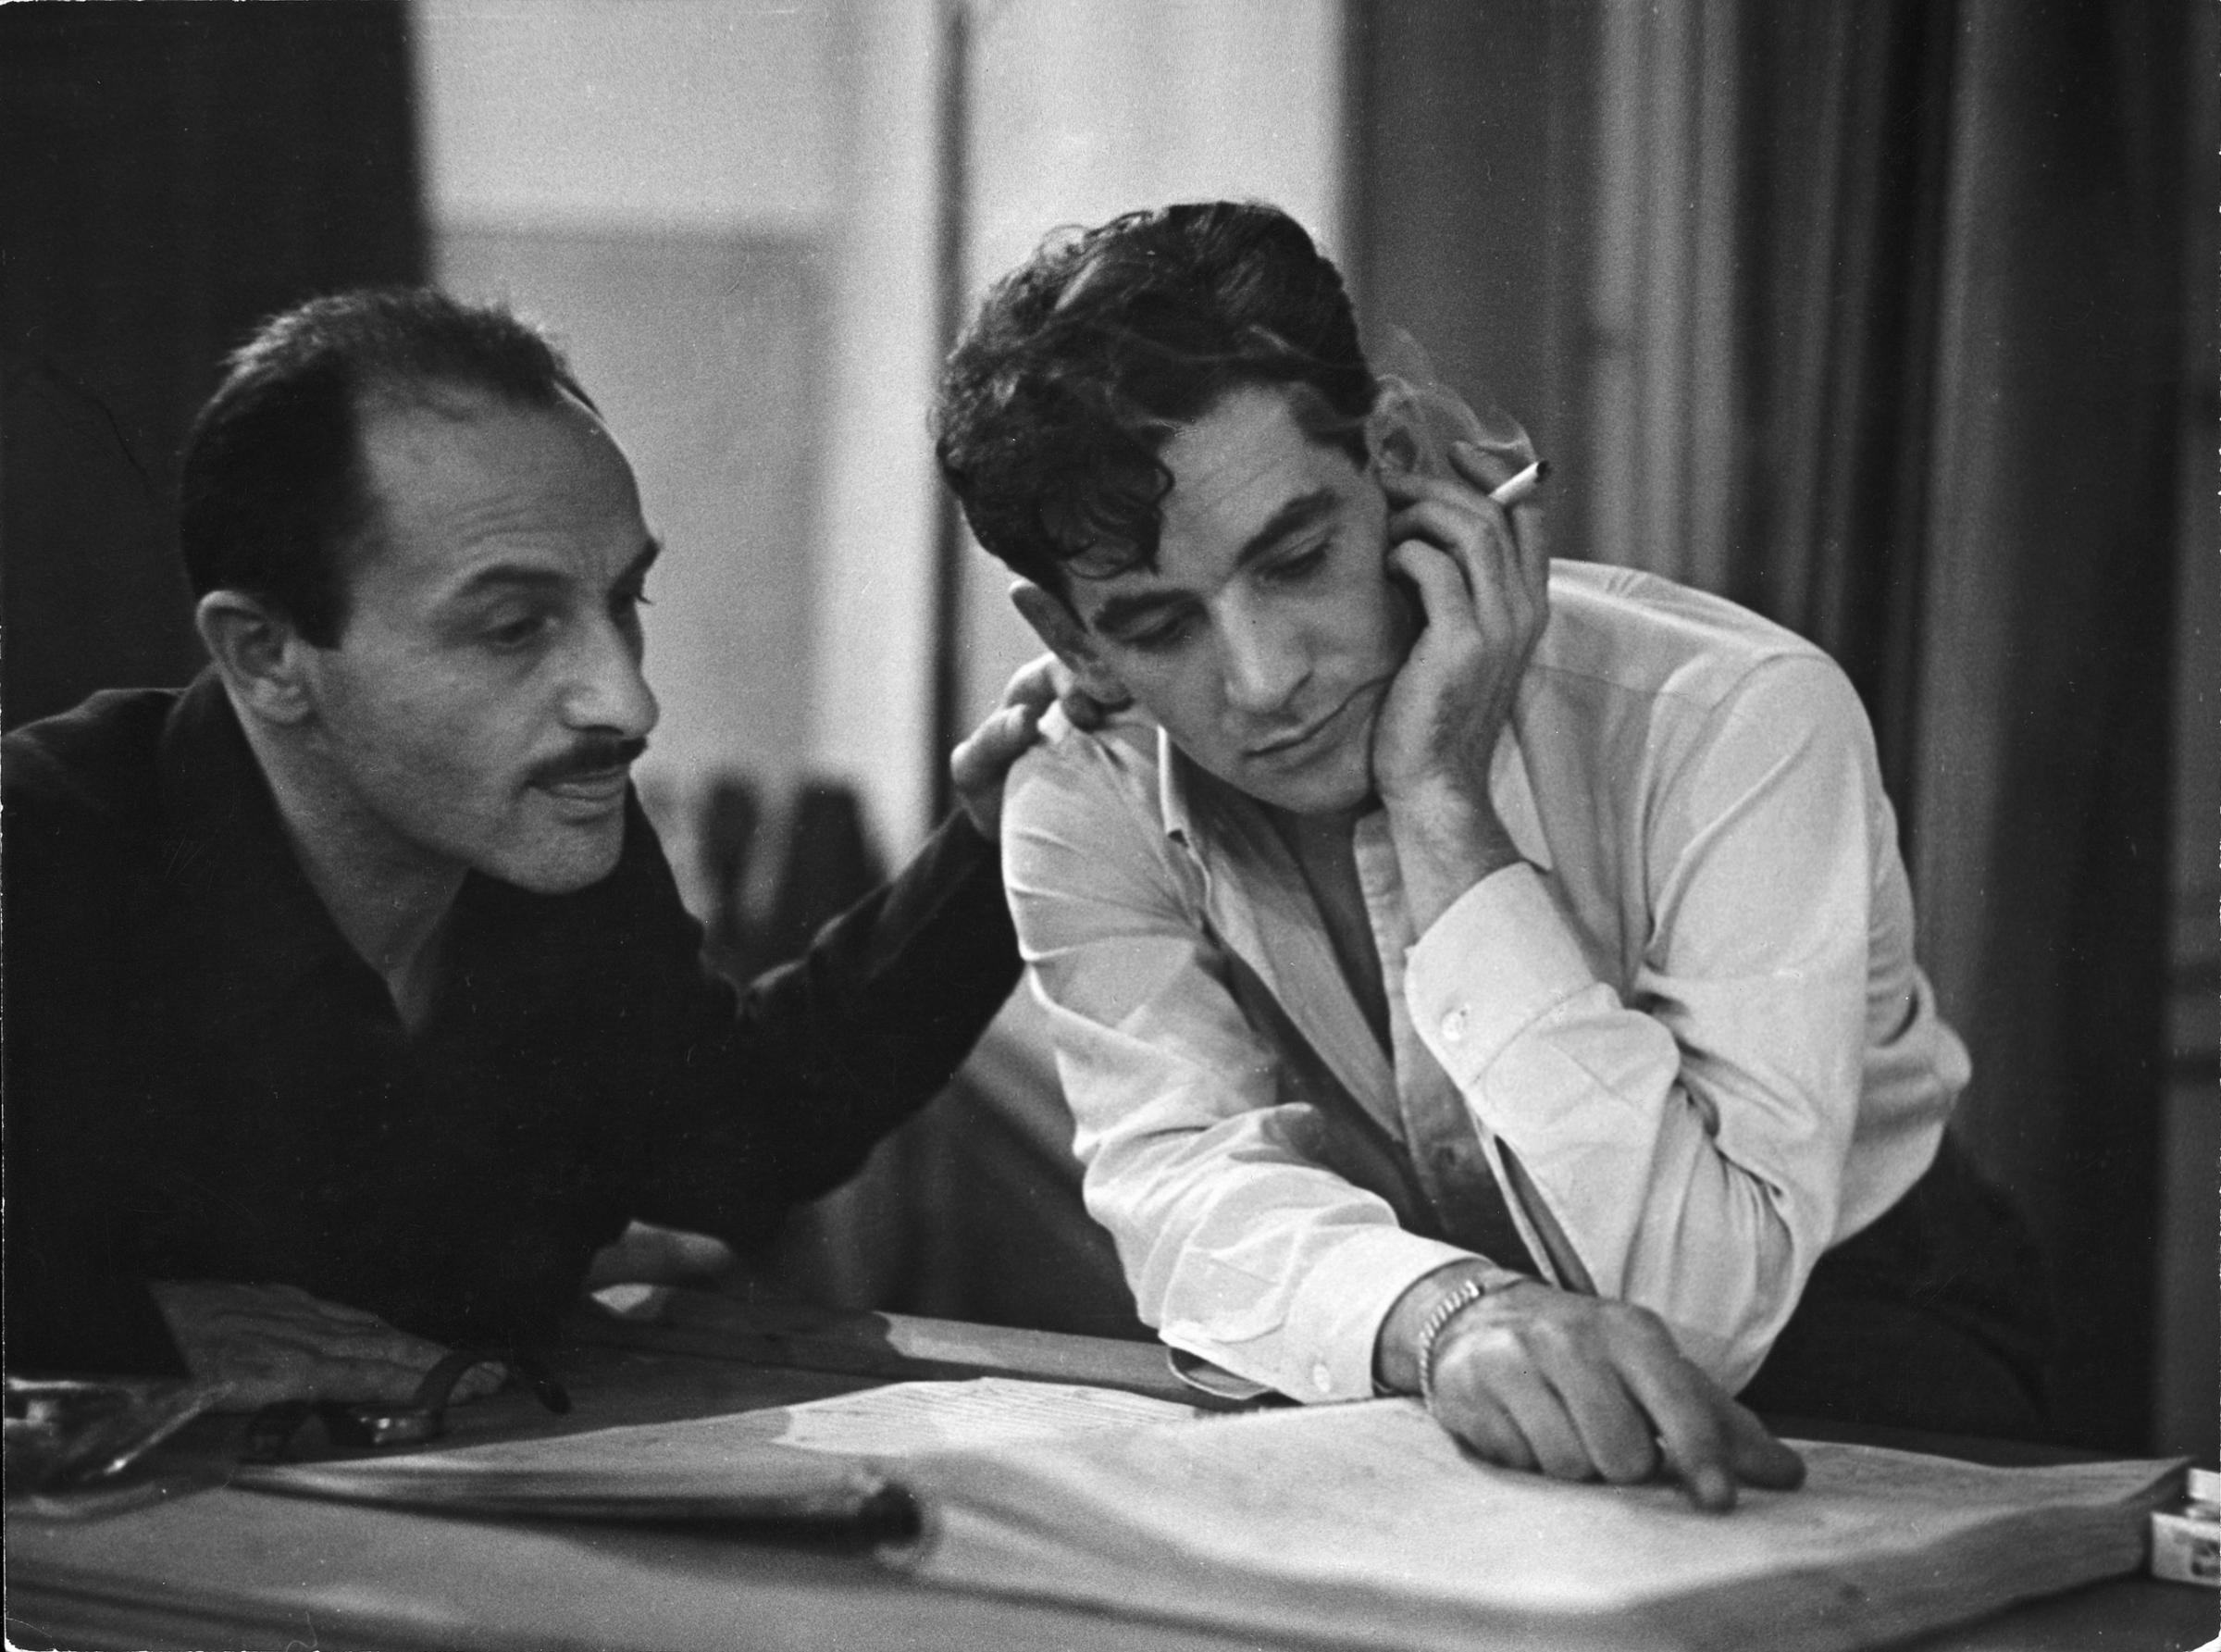 Composer Marc Blitzstein with conductor/composer Leonard Bernstein studying score of a Blitzstein work during a recording session.